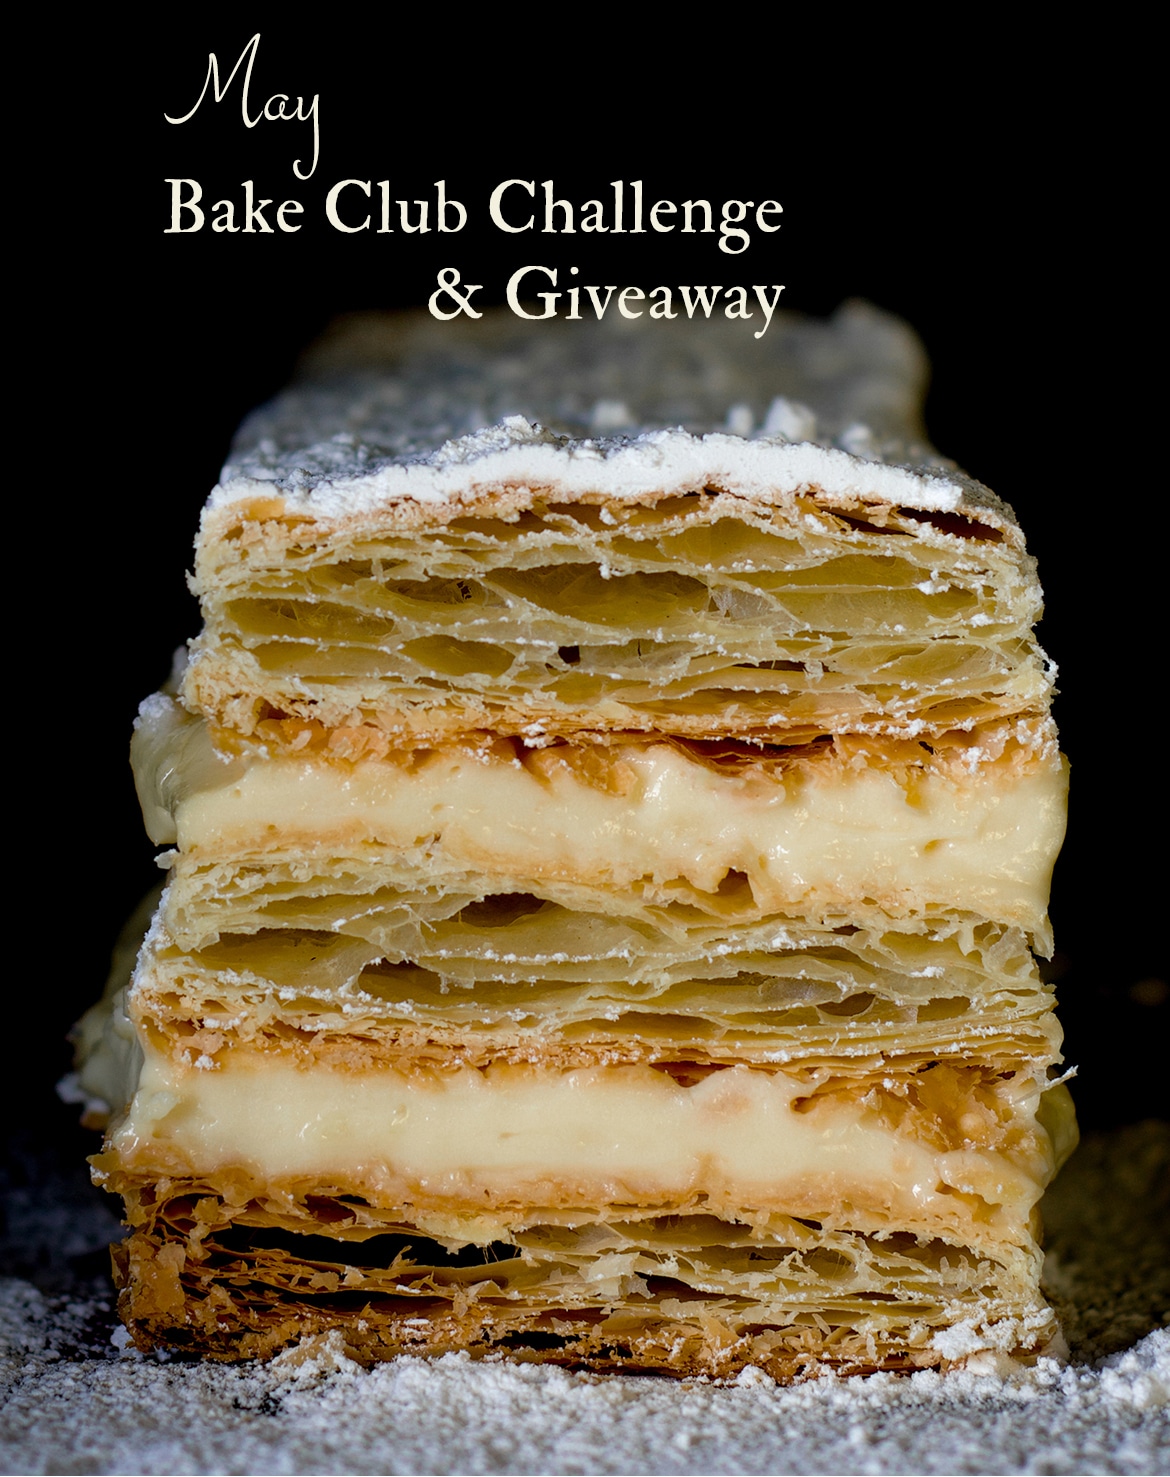 The Napoleon Dessert is the May, 2019 Bake Club Challenge